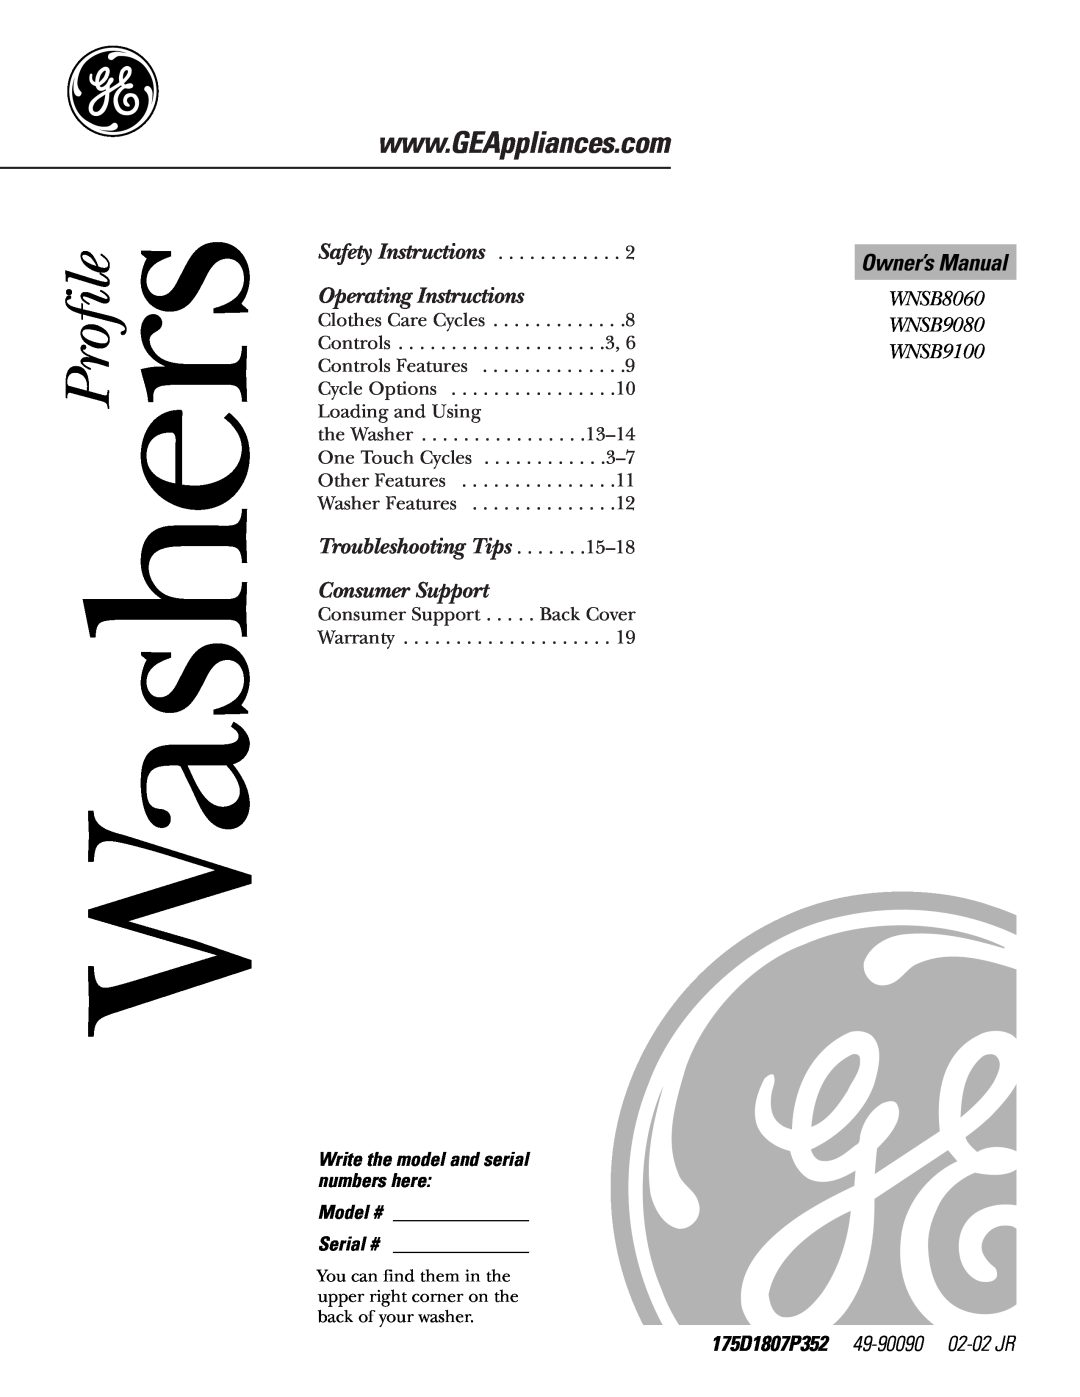 GE WNSB9100 owner manual Owner’s Manual, 175D1807P352 49-90090 02-02 JR, Washers, Profile, Operating Instructions 